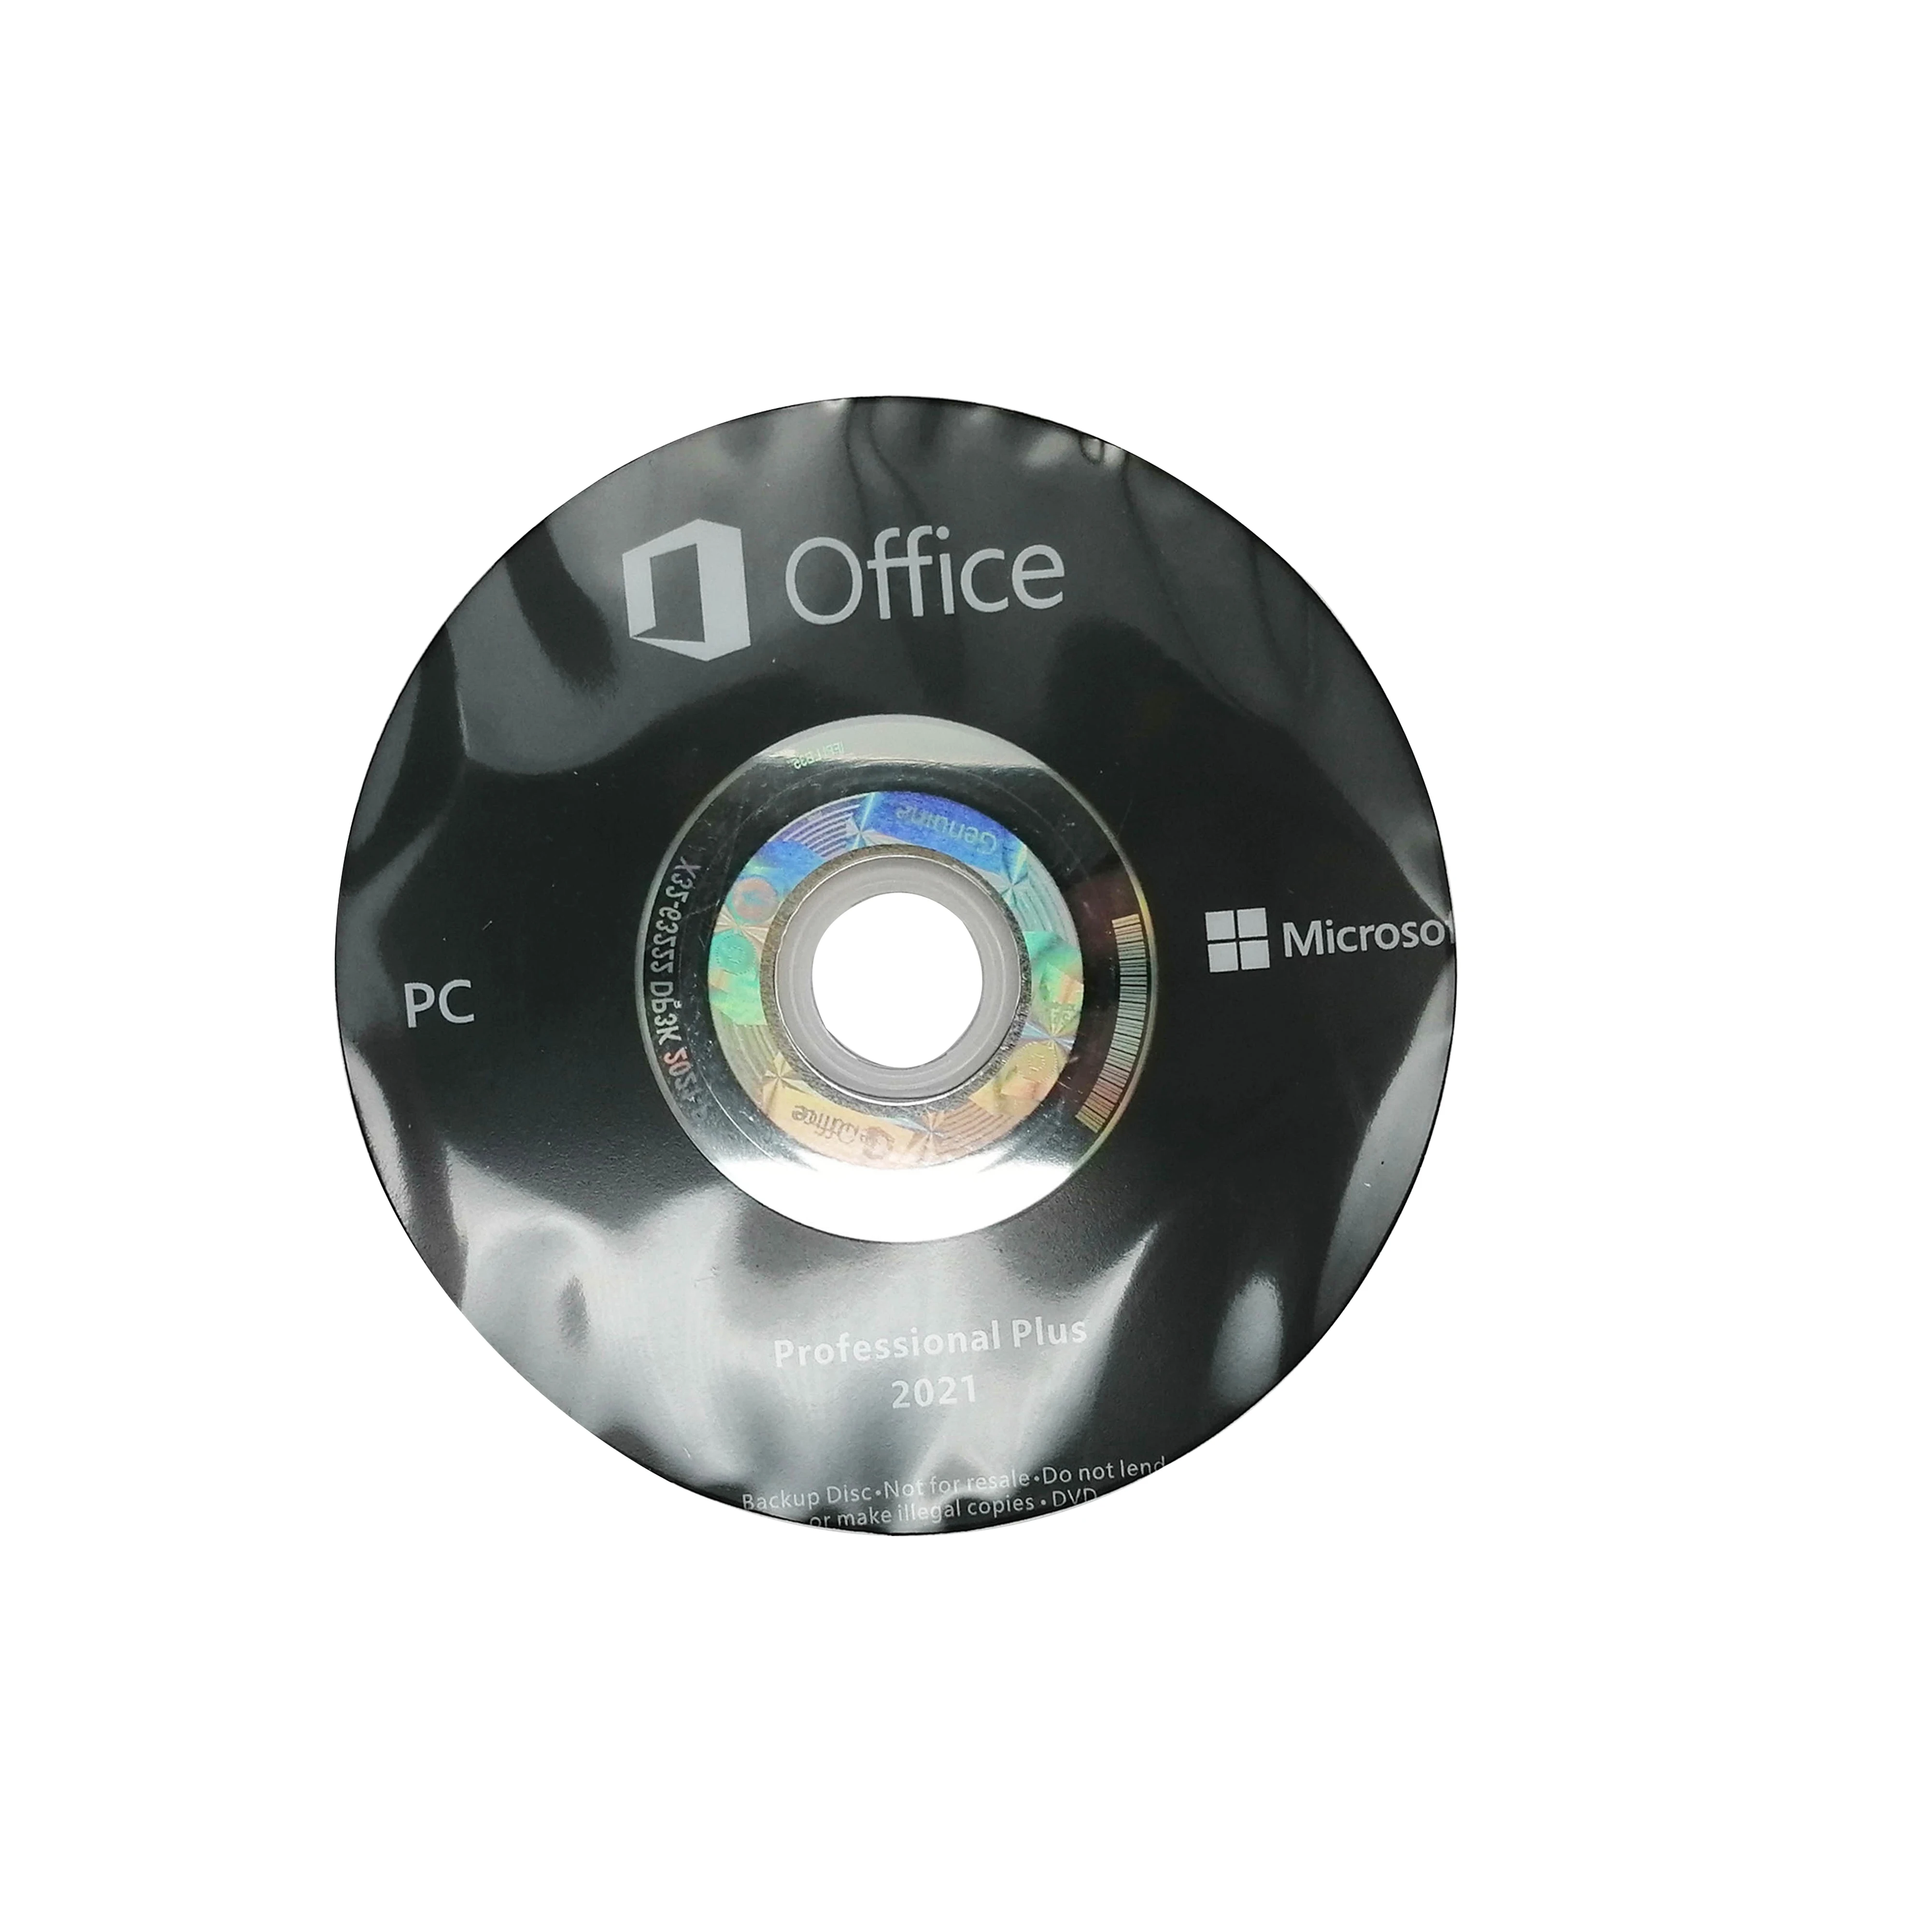 Big box DVD office 2021 Pro Plus free shipping Office 2021 professional pro for 1 PC 100% online activation dvd office 2021